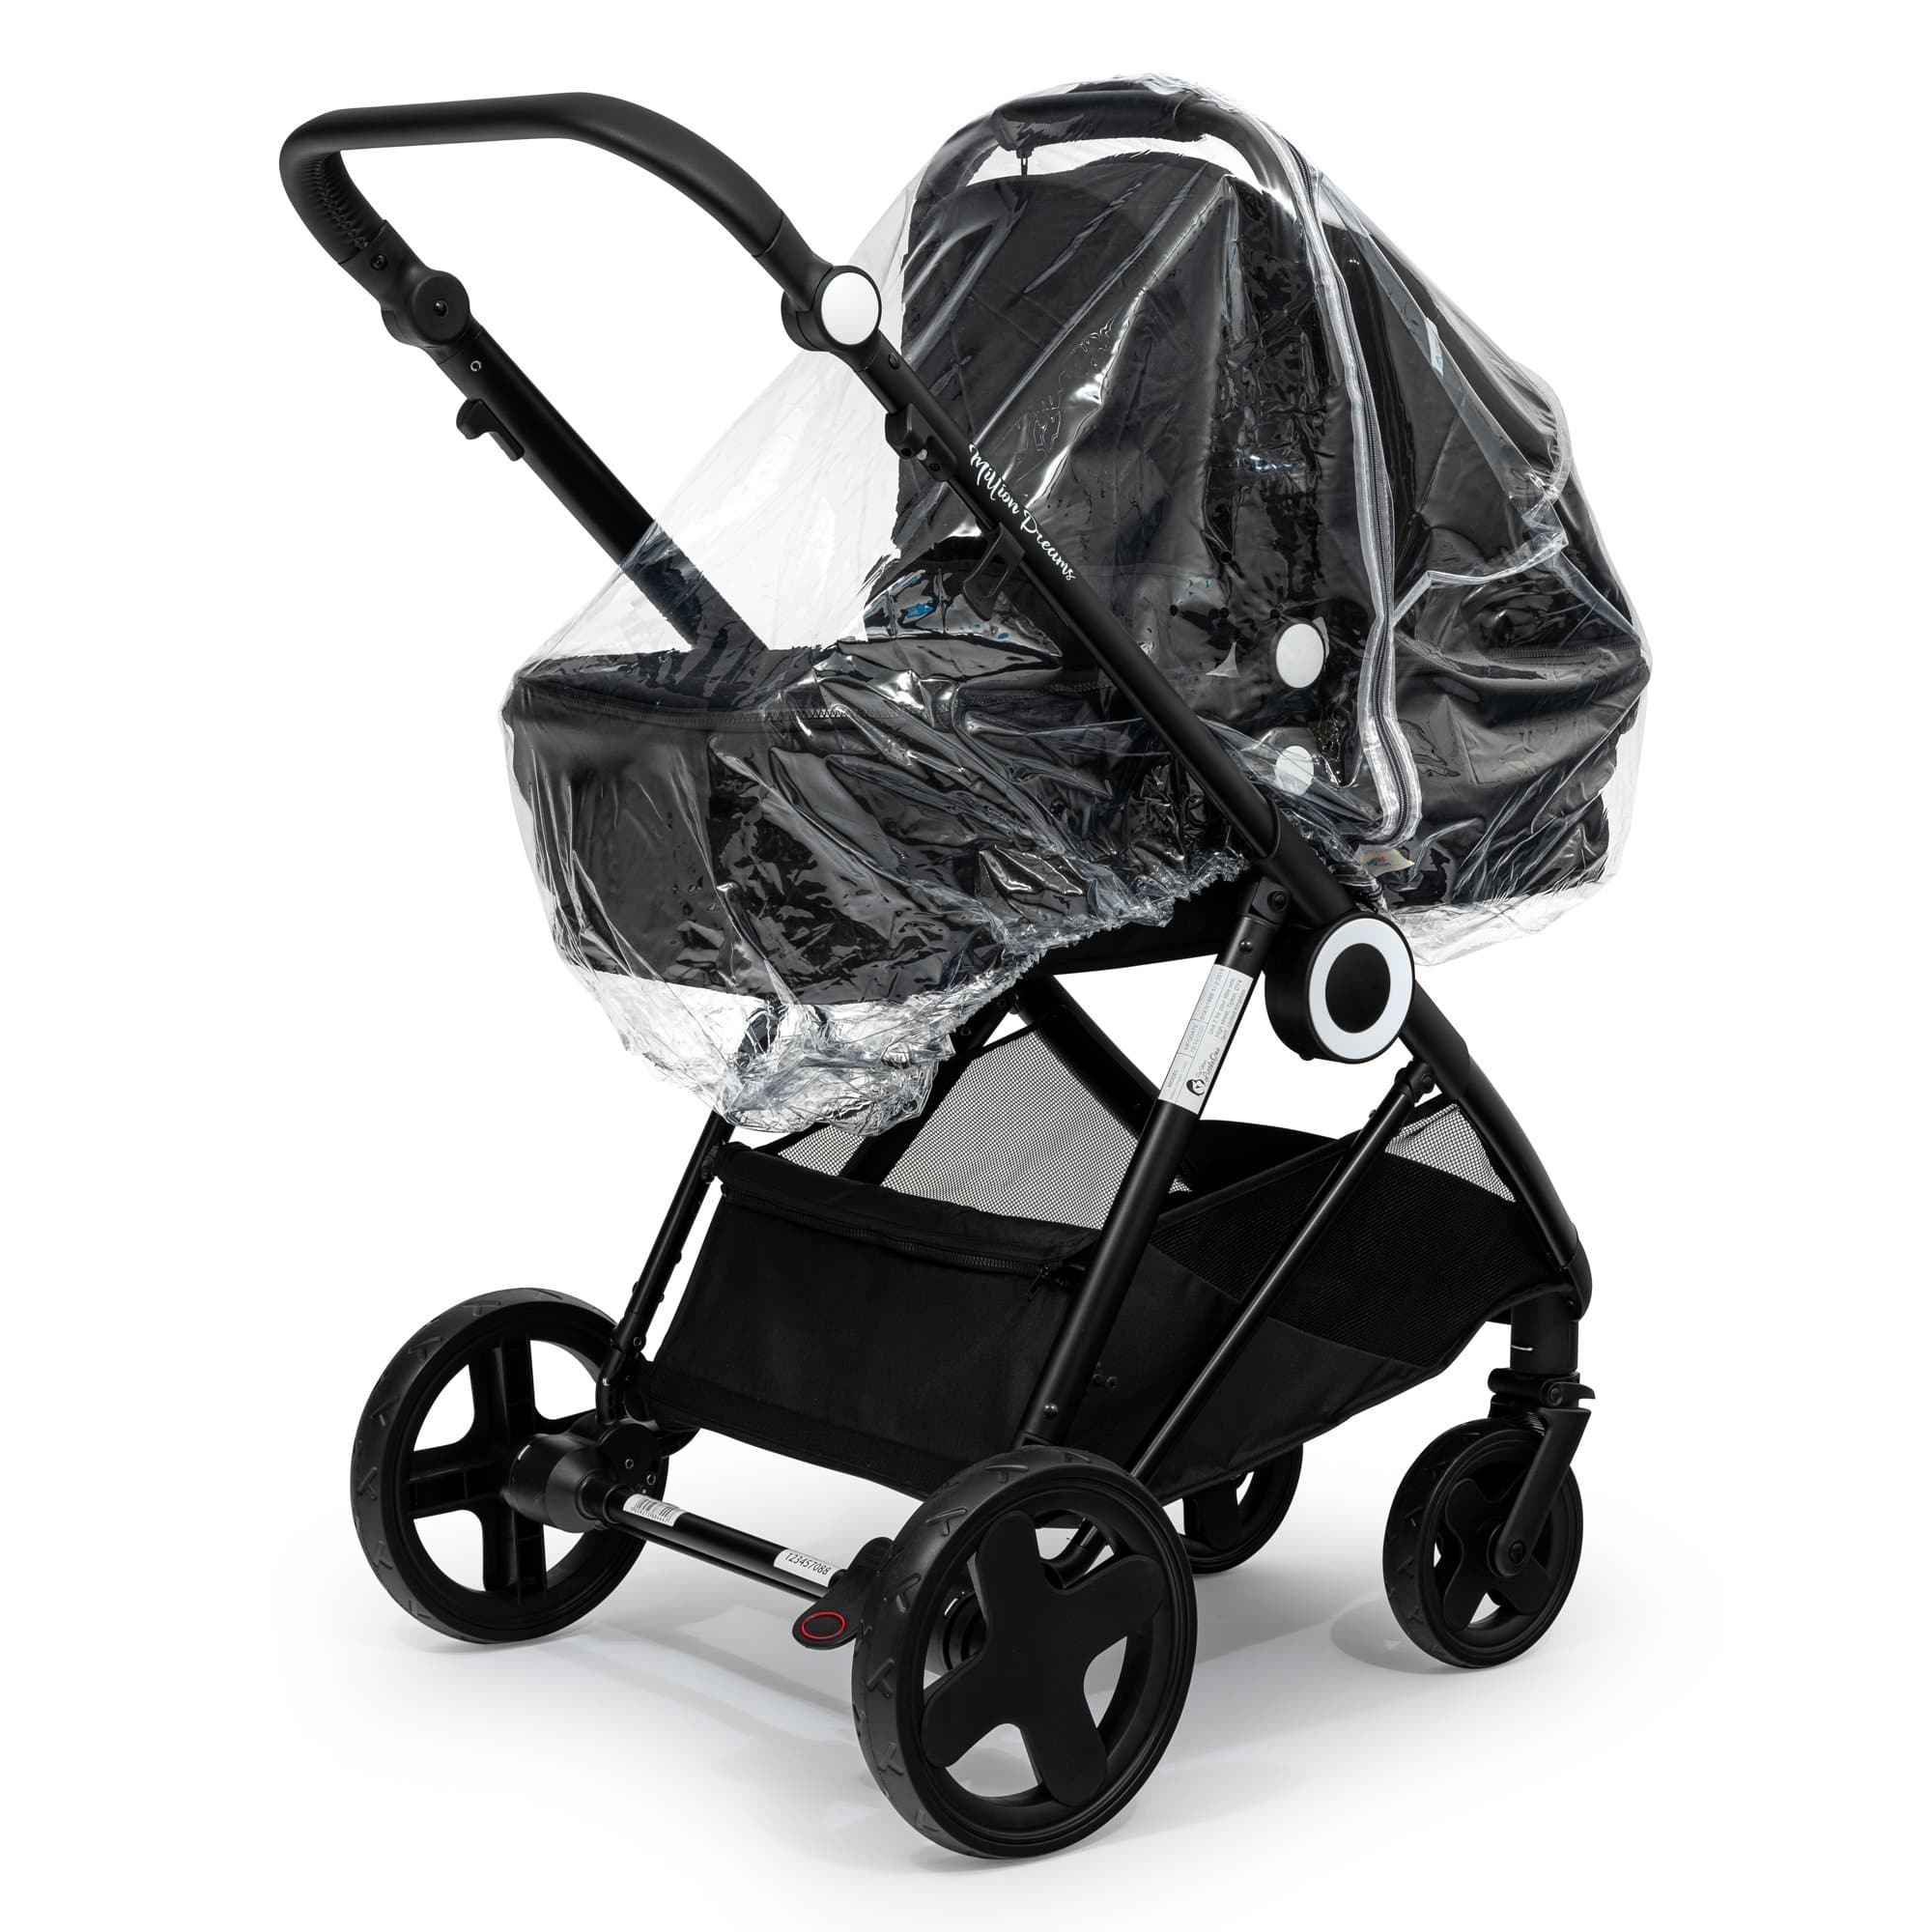 2 in 1 Rain Cover Compatible with Venicci - Fits All Models - For Your Little One